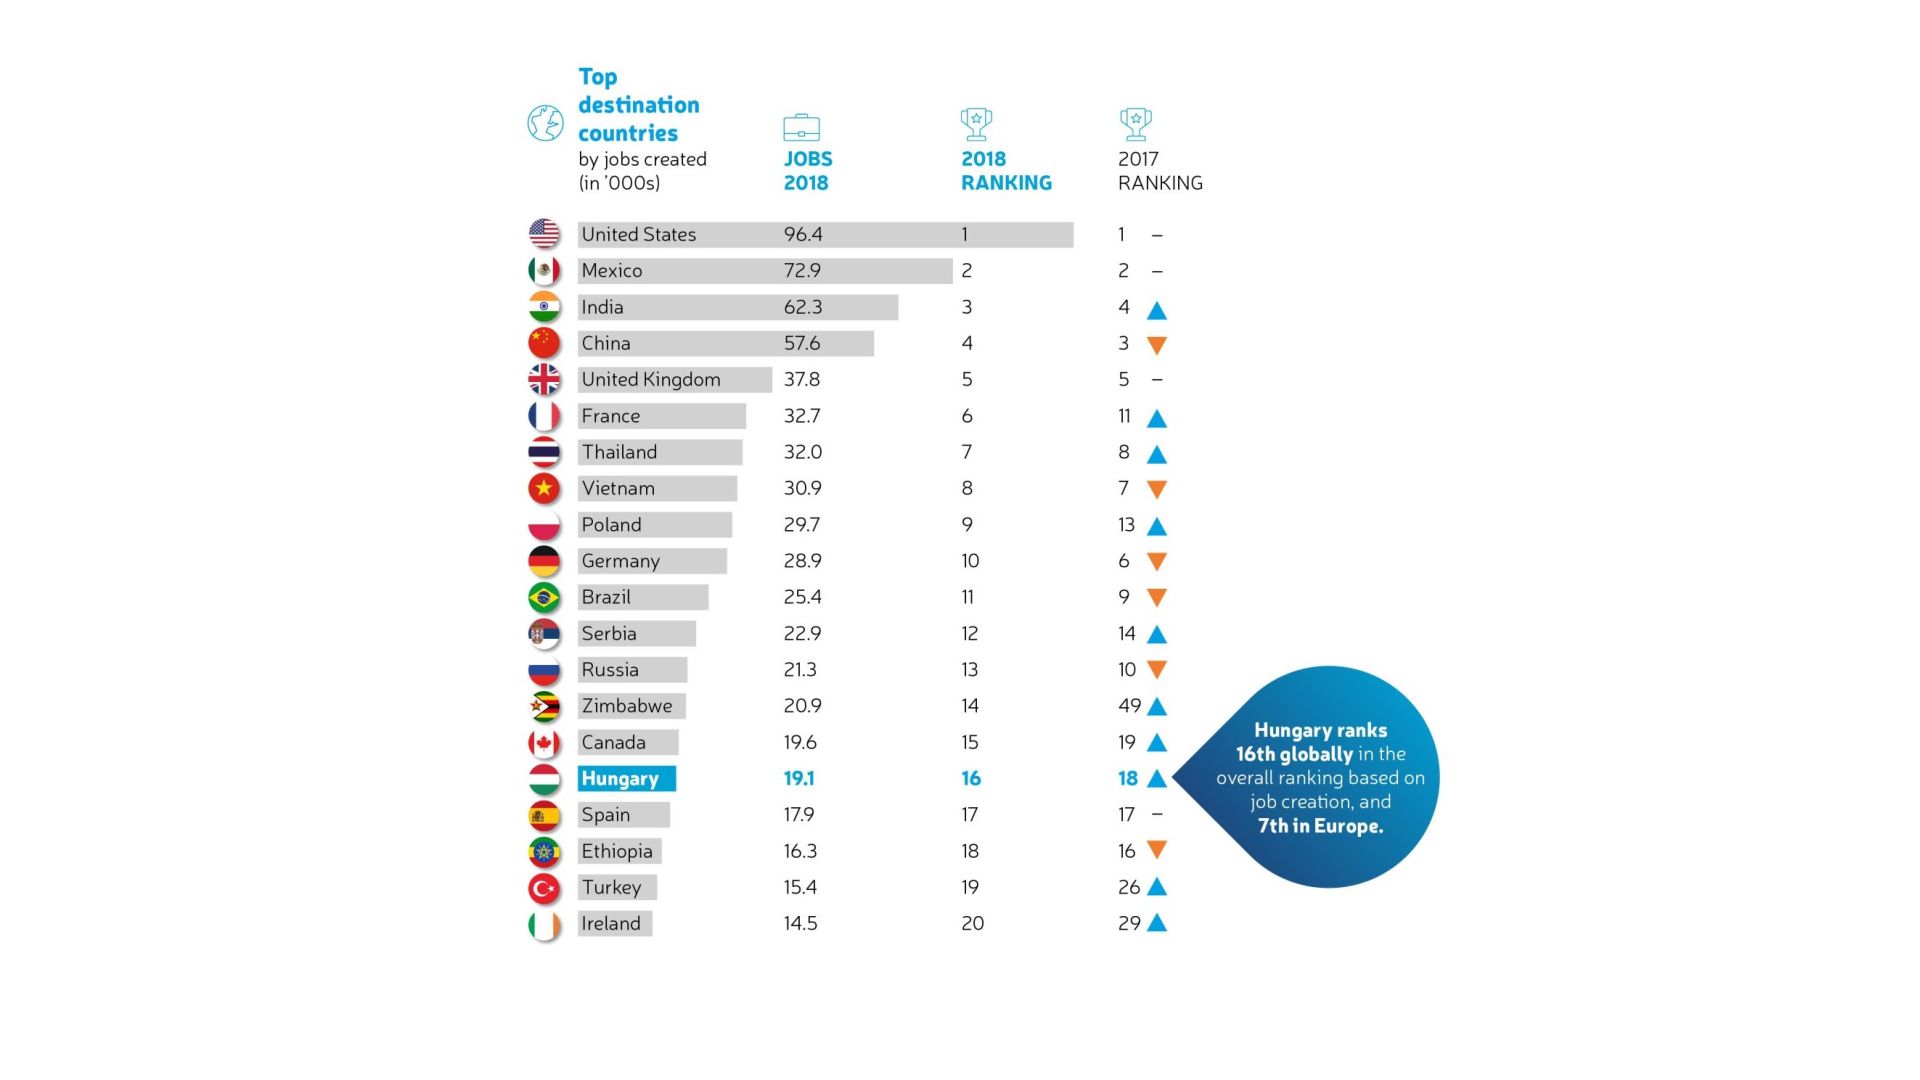 Hungary ranks 16th globally in the overall ranking based on job creation, and 7th in Europe